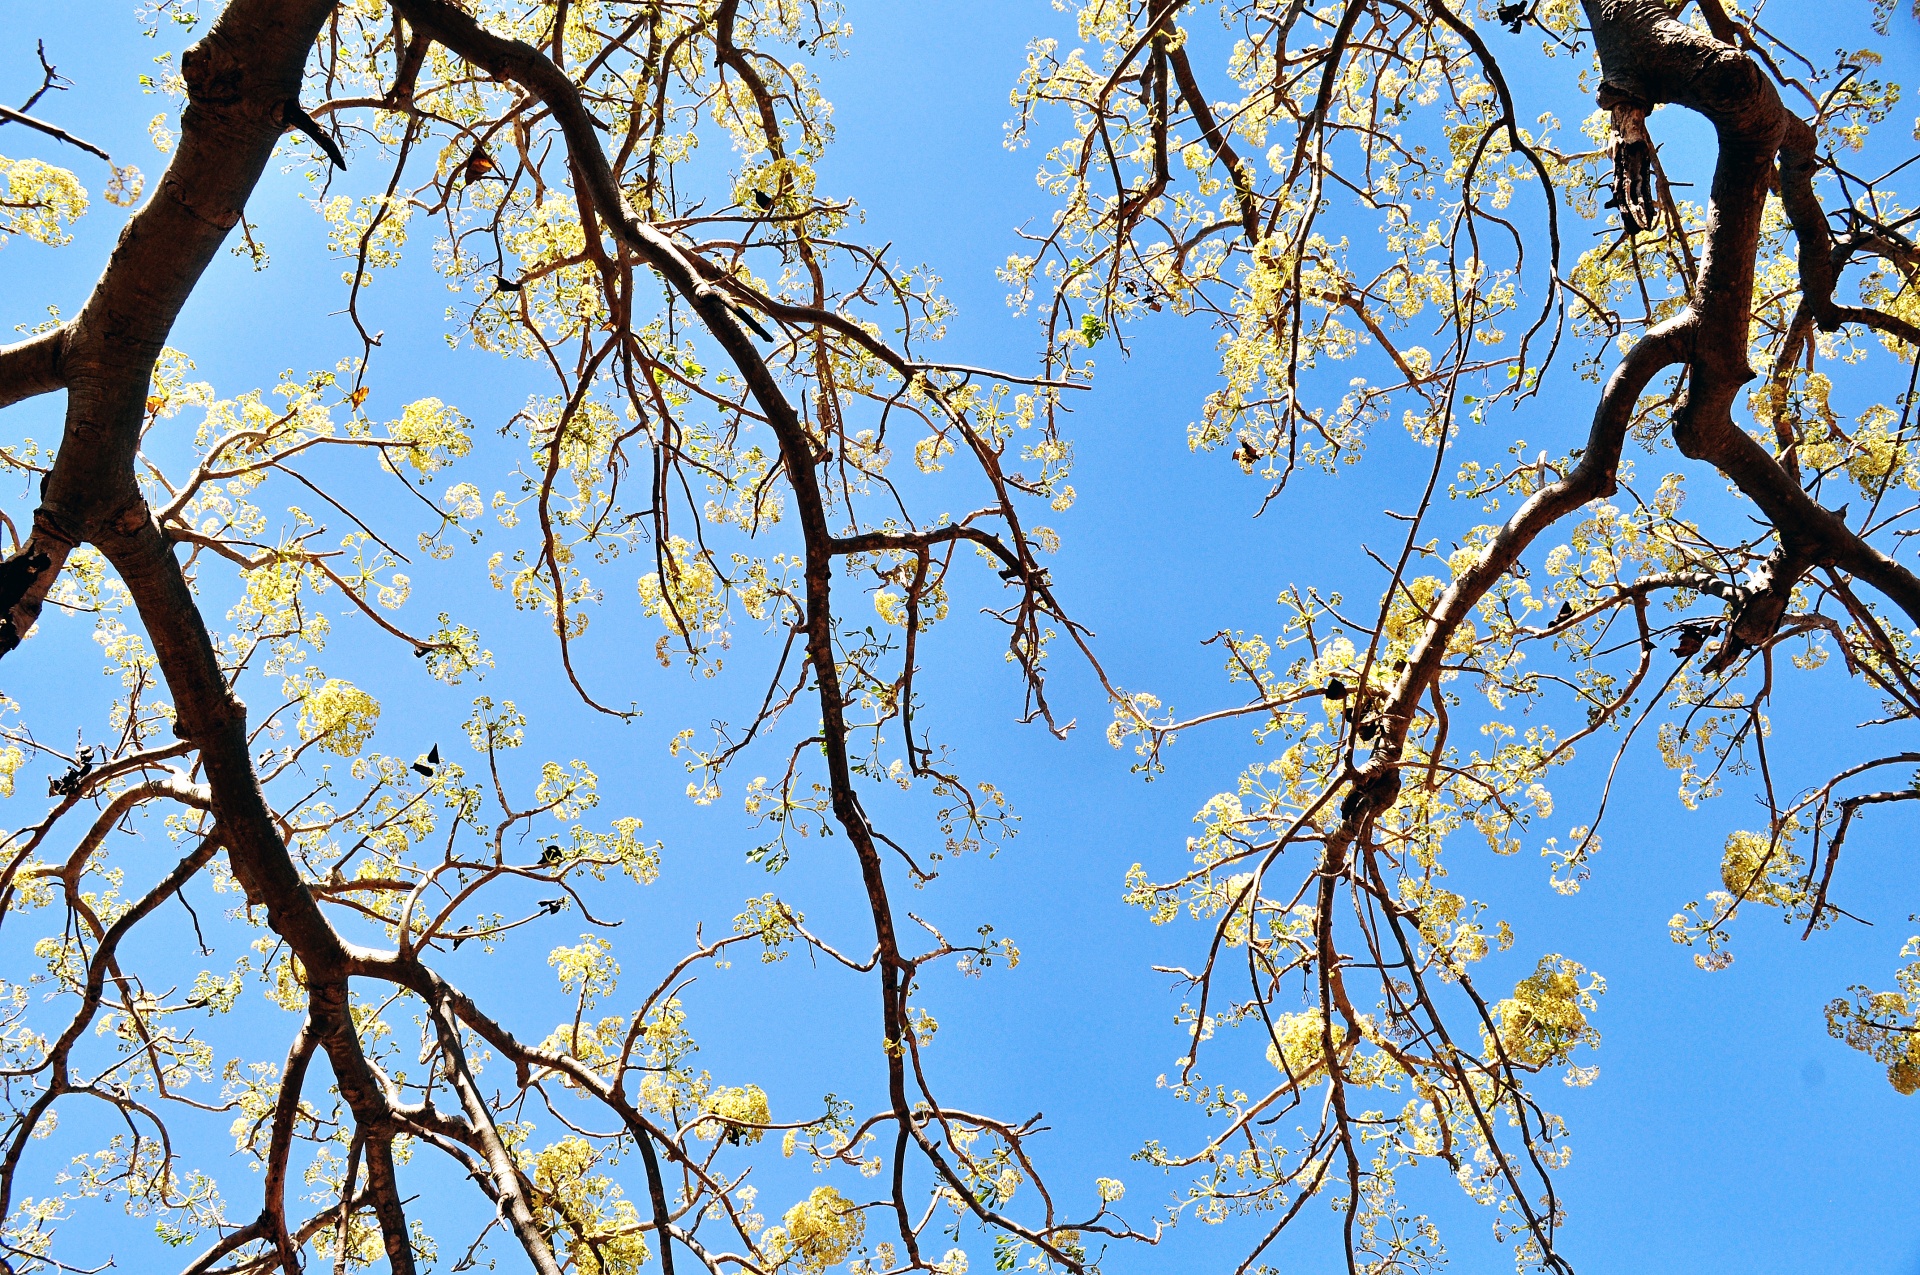 Flowering branches of a tree hanging downward